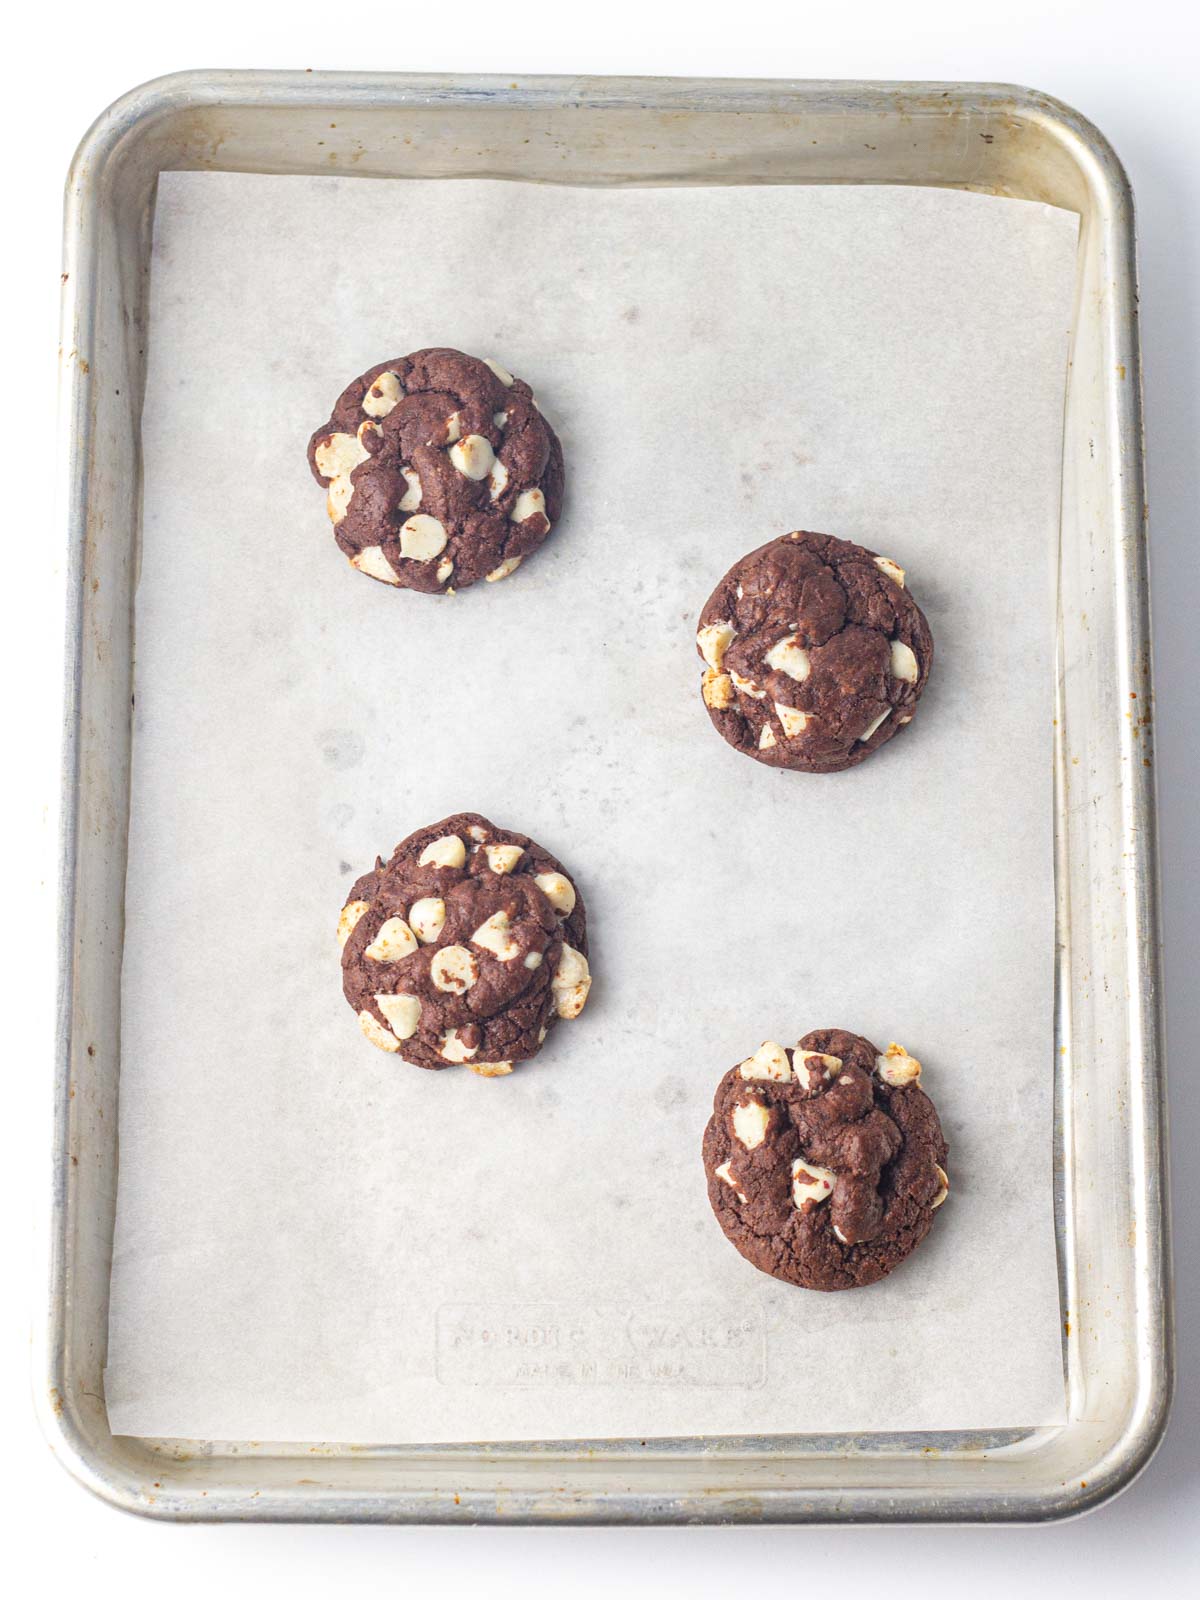 Four baked chocolate peppermint cookies on a parchment lined cookie sheet.